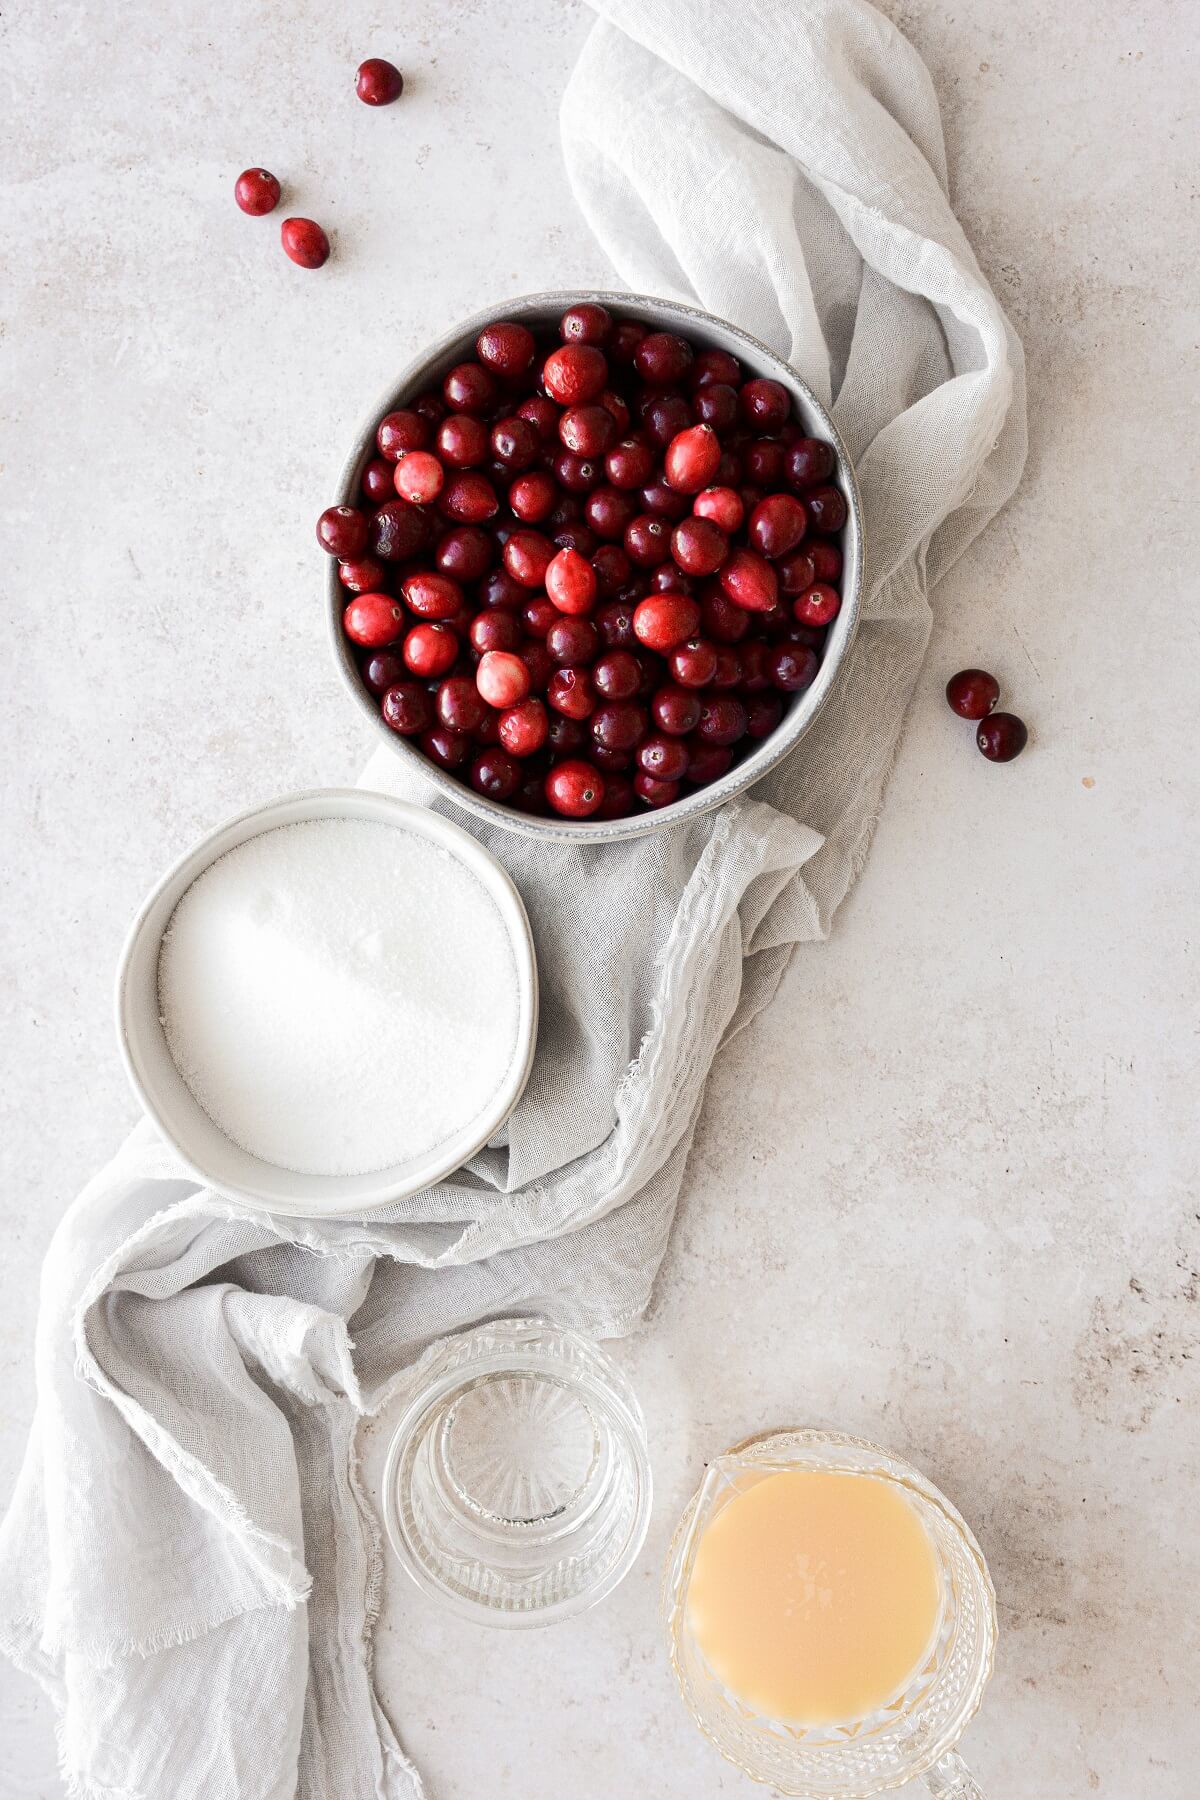 Ingredients for making homemade cranberry jelly.